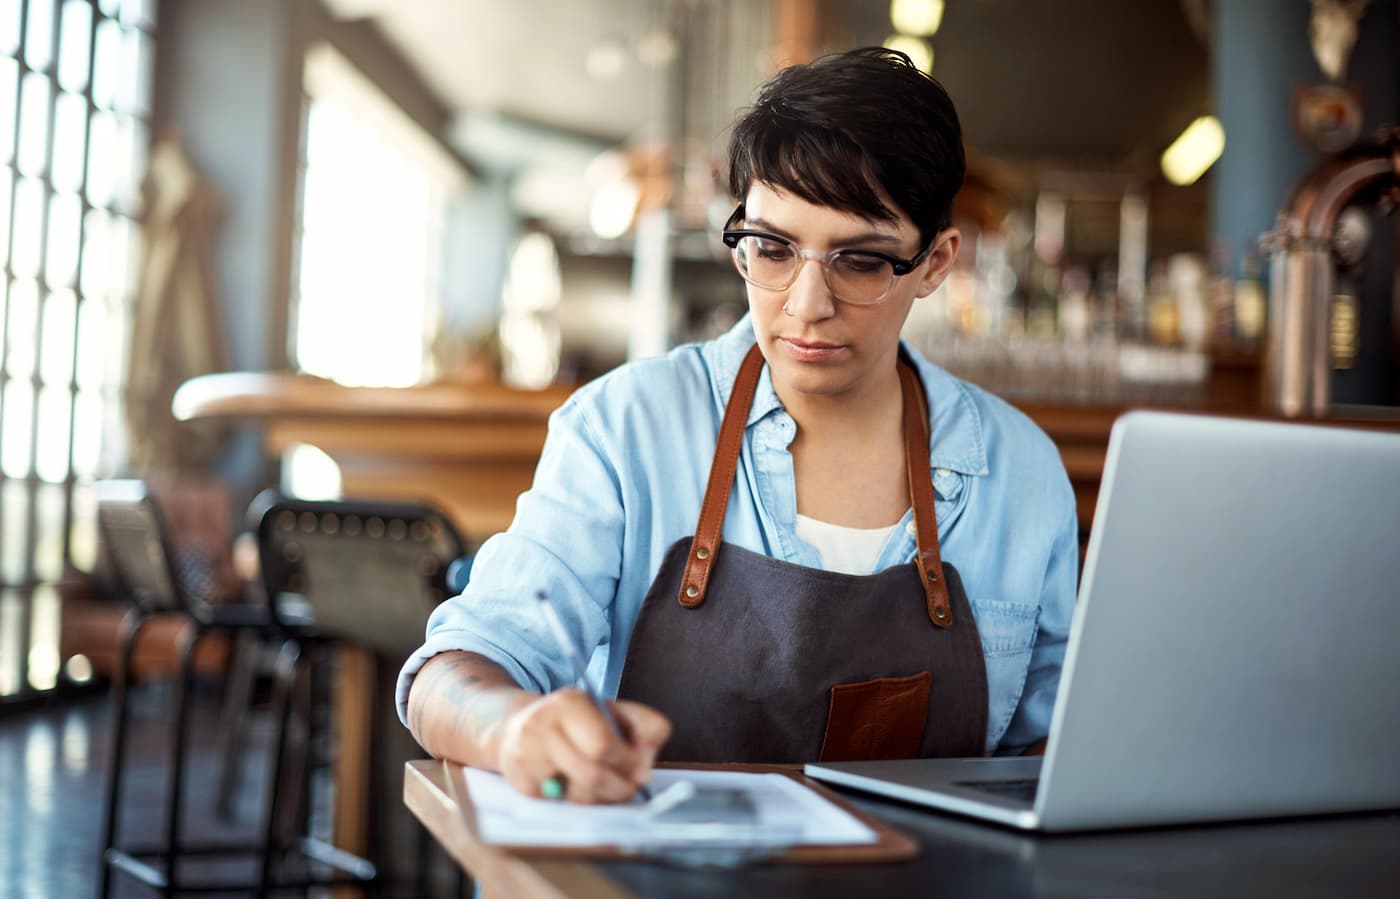 Restaurant owner writing on clipboard by laptop